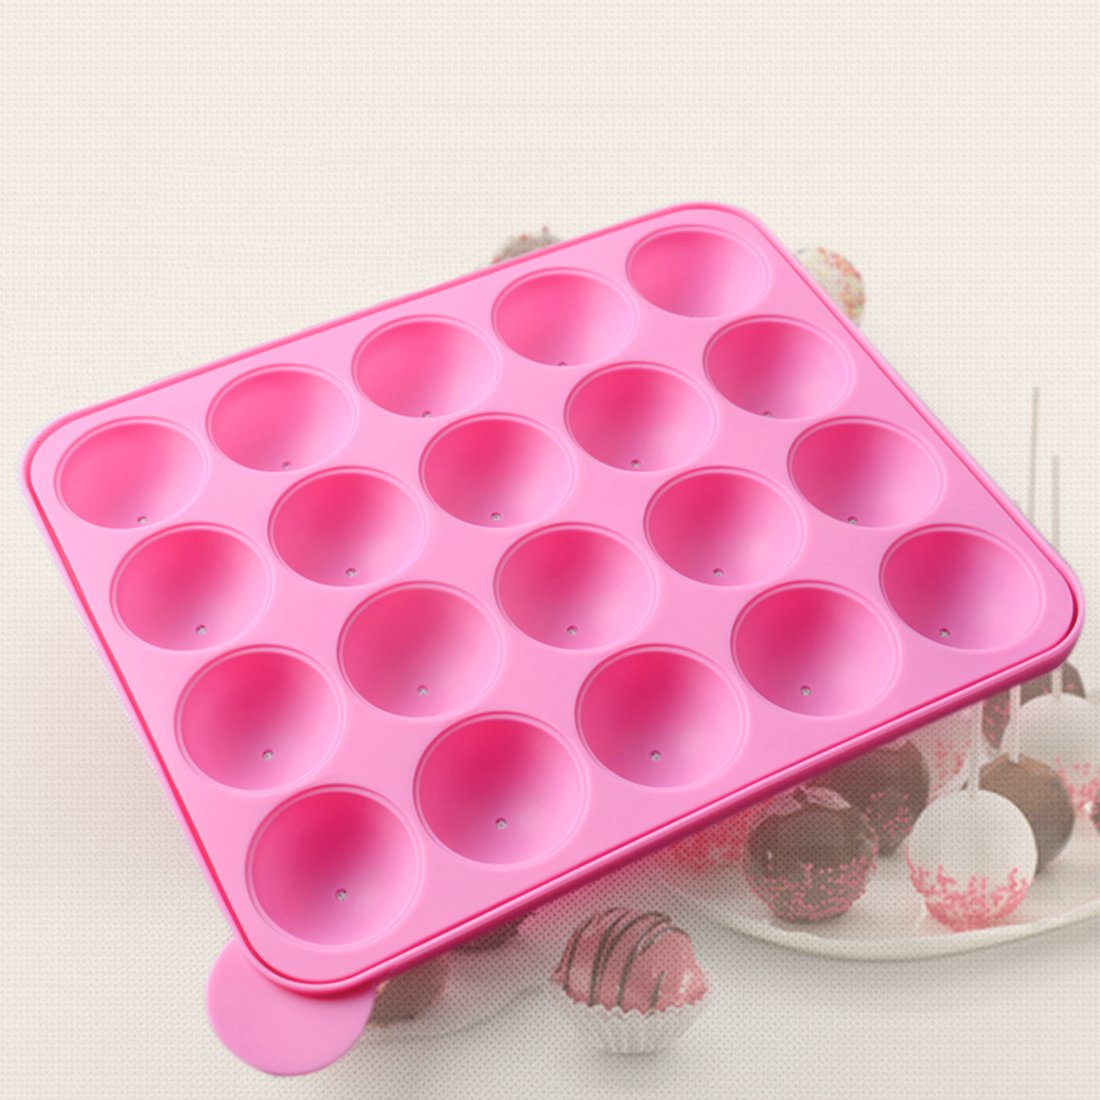 Tosnail 2 Pack of 20-Cavity Silicone Cake Pop Mold - Great for Hard Candy, Lollipop and Party Cupcake